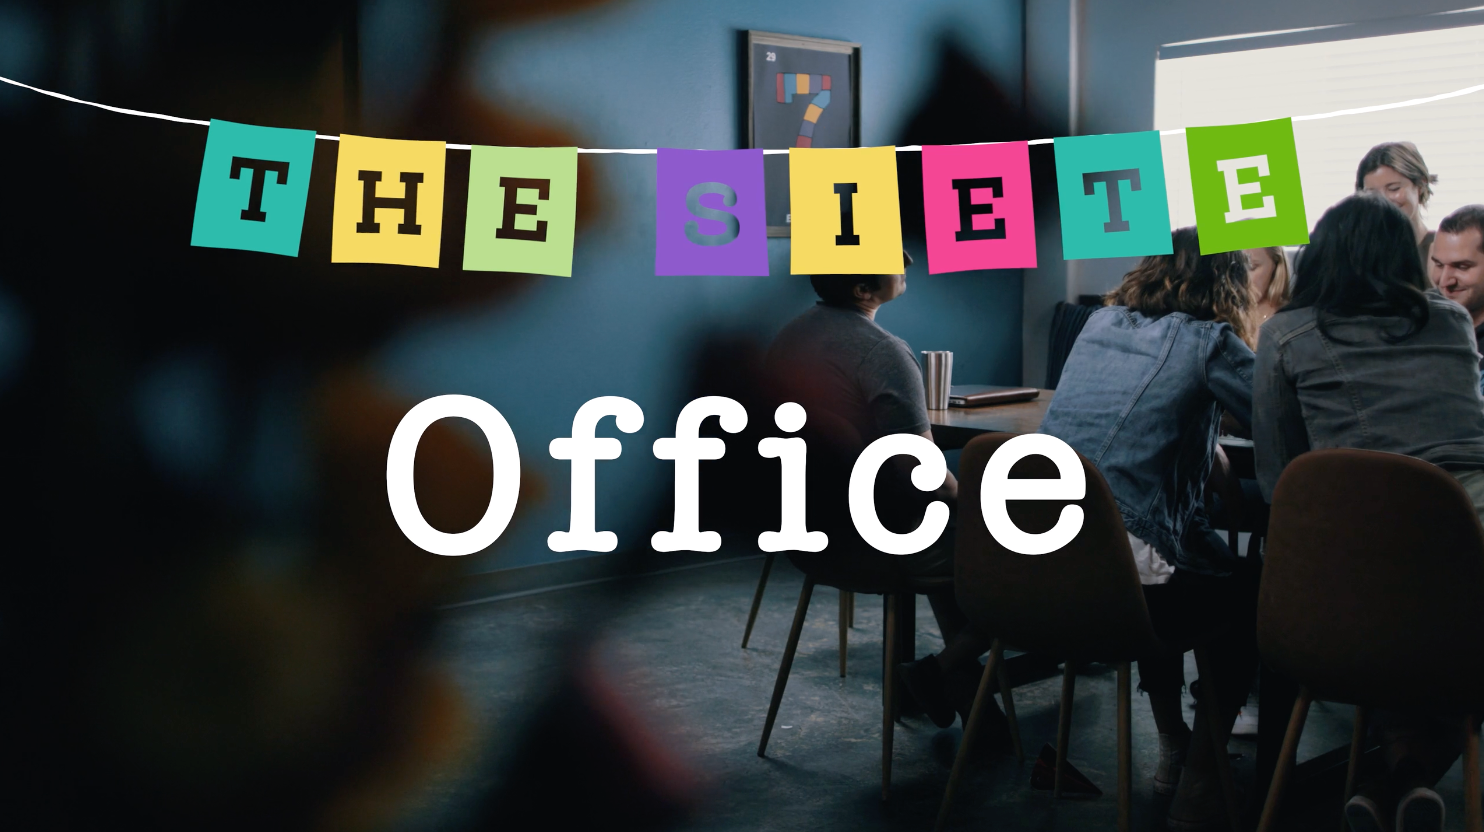 The Siete Office: The BIG Question (Part 1)